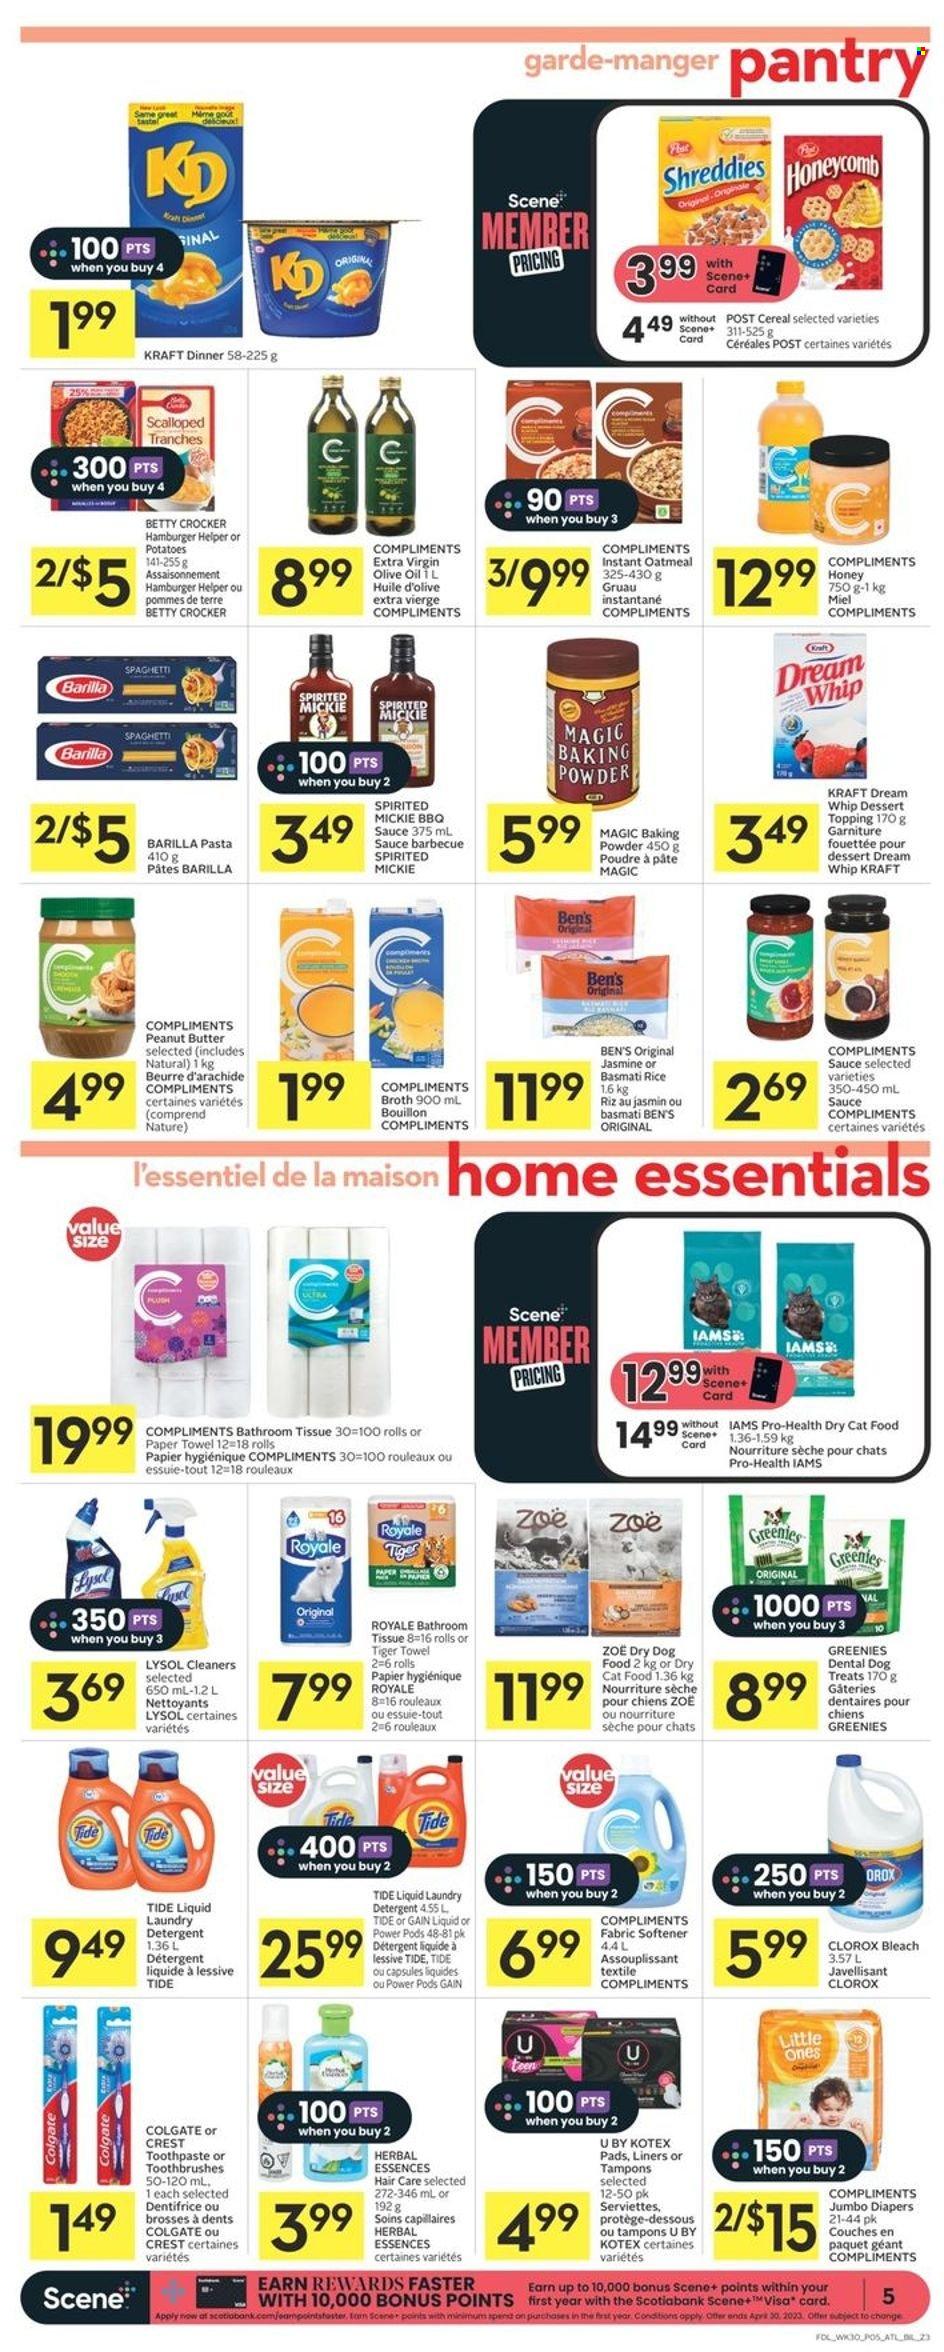 thumbnail - Co-op Flyer - November 24, 2022 - November 30, 2022 - Sales products - potatoes, spaghetti, pasta, sauce, Kraft®, baking powder, bouillon, oatmeal, topping, broth, cereals, basmati rice, rice, spice, BBQ sauce, extra virgin olive oil, olive oil, oil, honey, peanut butter, nappies, bath tissue, paper towels, Gain, bleach, Lysol, Clorox, Tide, fabric softener, laundry detergent, toothpaste, Crest, Kotex, Kotex pads, tampons, Herbal Essences, Zoe, animal food, Greenies, dry dog food, cat food, dog food, dry cat food, Iams, detergent, Colgate, Barilla. Page 5.